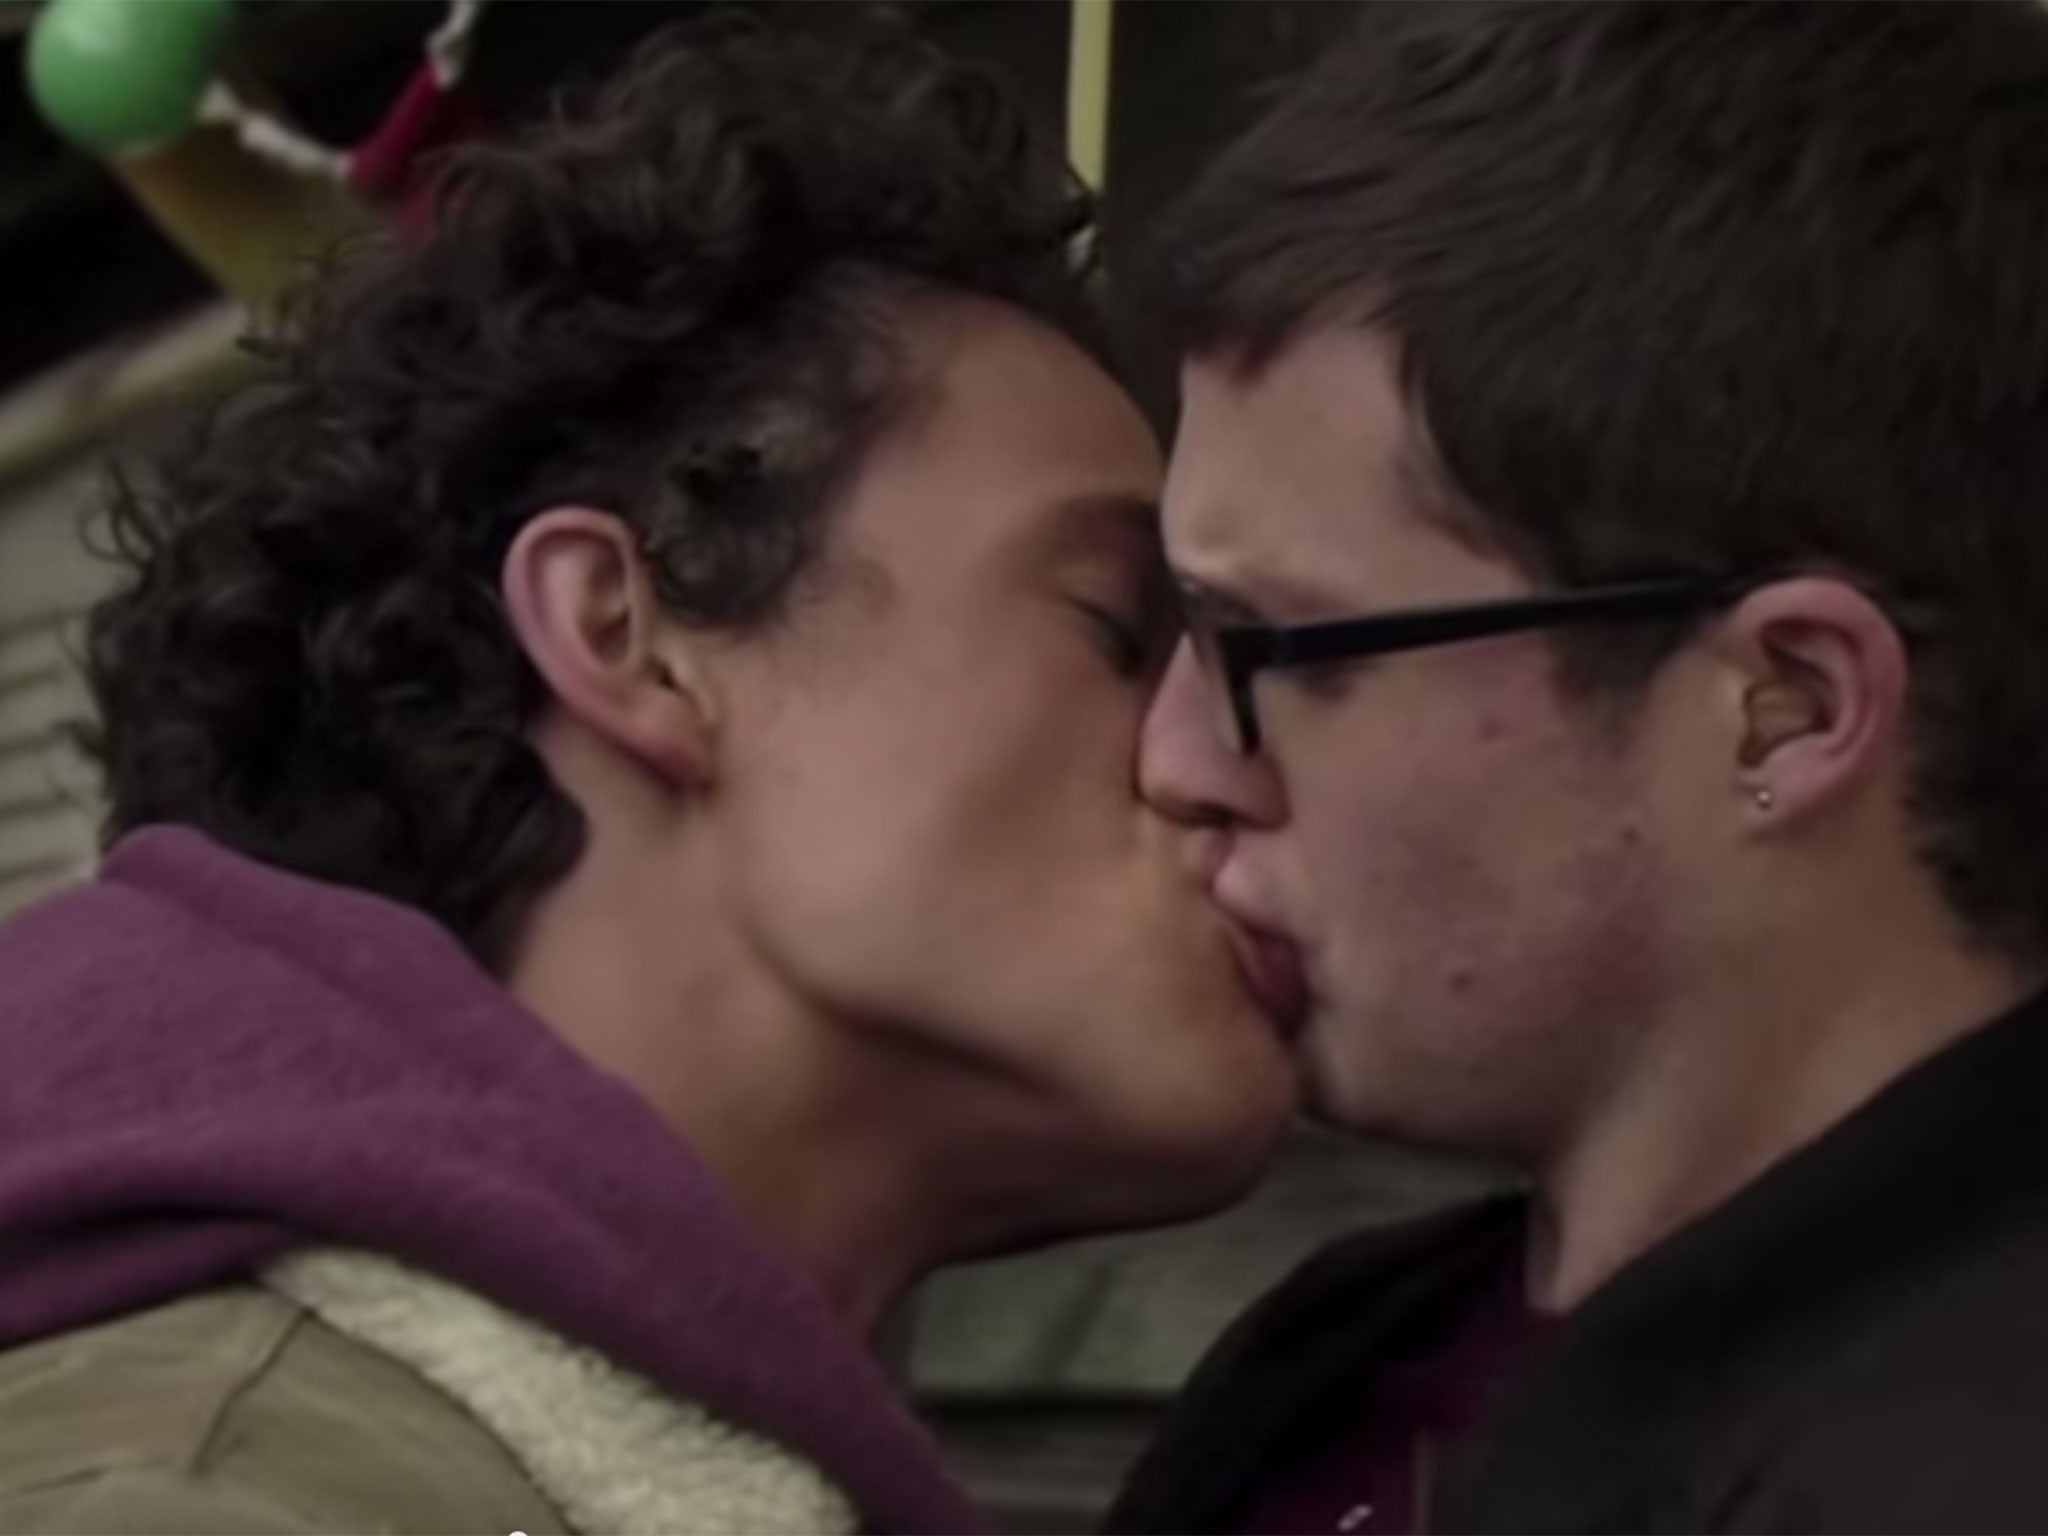 EastEnders characters share a kiss. Soap actors now use body doubles for intimate scenes due to coronavirus